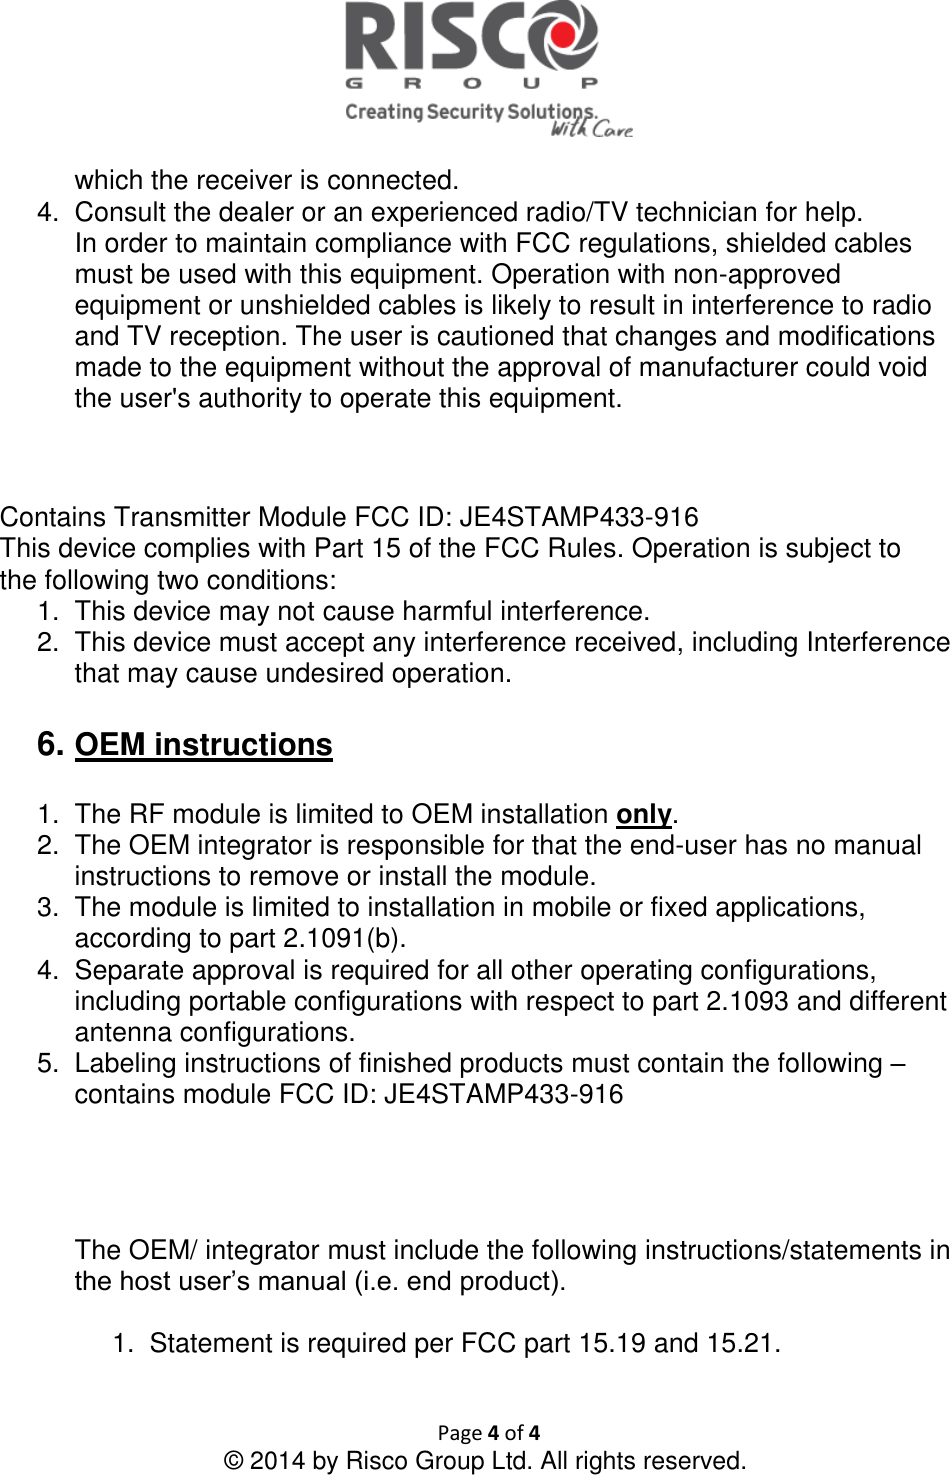   Page 4 of 4 © 2014 by Risco Group Ltd. All rights reserved.  which the receiver is connected. 4.  Consult the dealer or an experienced radio/TV technician for help. In order to maintain compliance with FCC regulations, shielded cables must be used with this equipment. Operation with non-approved equipment or unshielded cables is likely to result in interference to radio and TV reception. The user is cautioned that changes and modifications made to the equipment without the approval of manufacturer could void the user&apos;s authority to operate this equipment.   Contains Transmitter Module FCC ID: JE4STAMP433-916 This device complies with Part 15 of the FCC Rules. Operation is subject to the following two conditions: 1.  This device may not cause harmful interference. 2.  This device must accept any interference received, including Interference that may cause undesired operation.  6. OEM instructions  1.  The RF module is limited to OEM installation only. 2.  The OEM integrator is responsible for that the end-user has no manual instructions to remove or install the module. 3.  The module is limited to installation in mobile or fixed applications, according to part 2.1091(b). 4.  Separate approval is required for all other operating configurations, including portable configurations with respect to part 2.1093 and different antenna configurations. 5.  Labeling instructions of finished products must contain the following – contains module FCC ID: JE4STAMP433-916        The OEM/ integrator must include the following instructions/statements in the host user’s manual (i.e. end product).  1.  Statement is required per FCC part 15.19 and 15.21.   